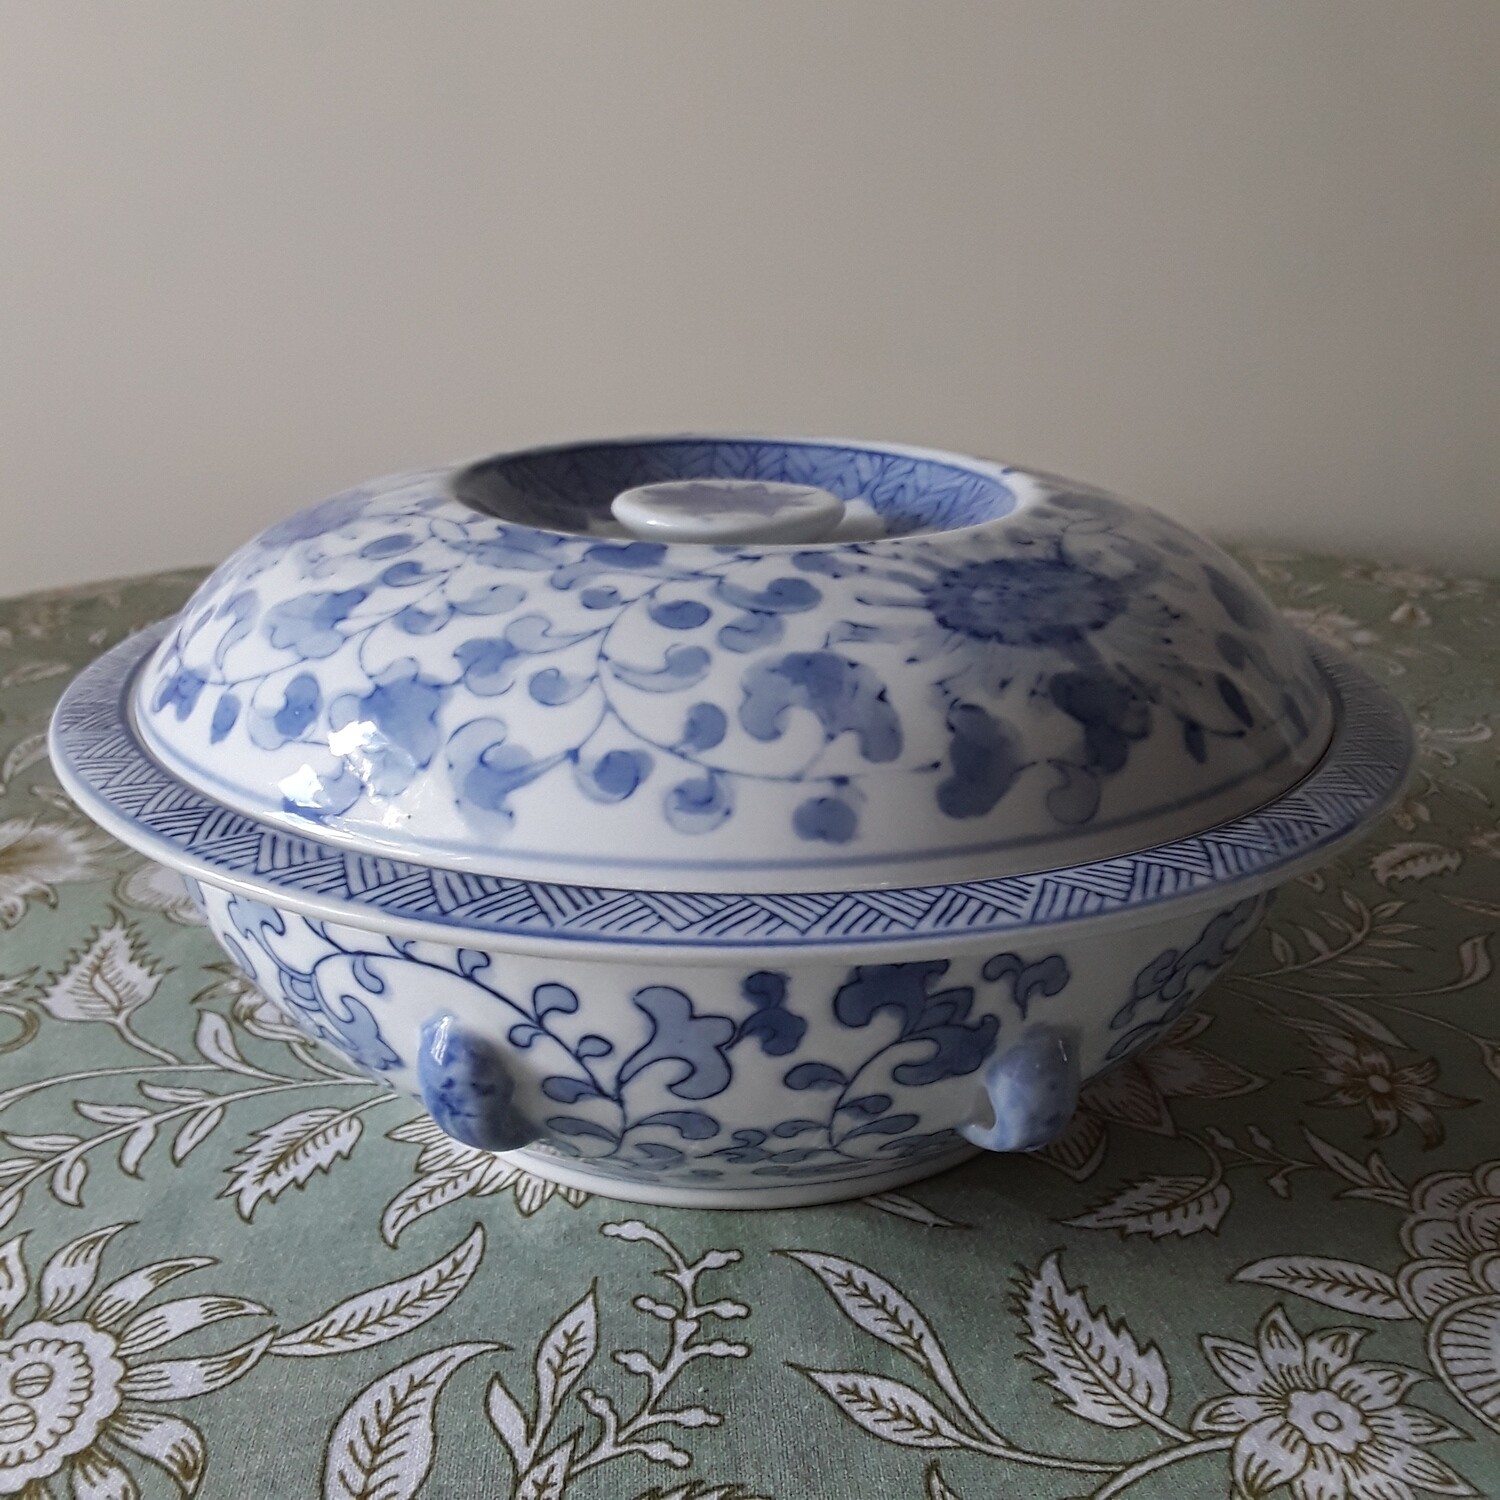 Vintage Blue and White Chinese Porcelain Lidded Serving Dish